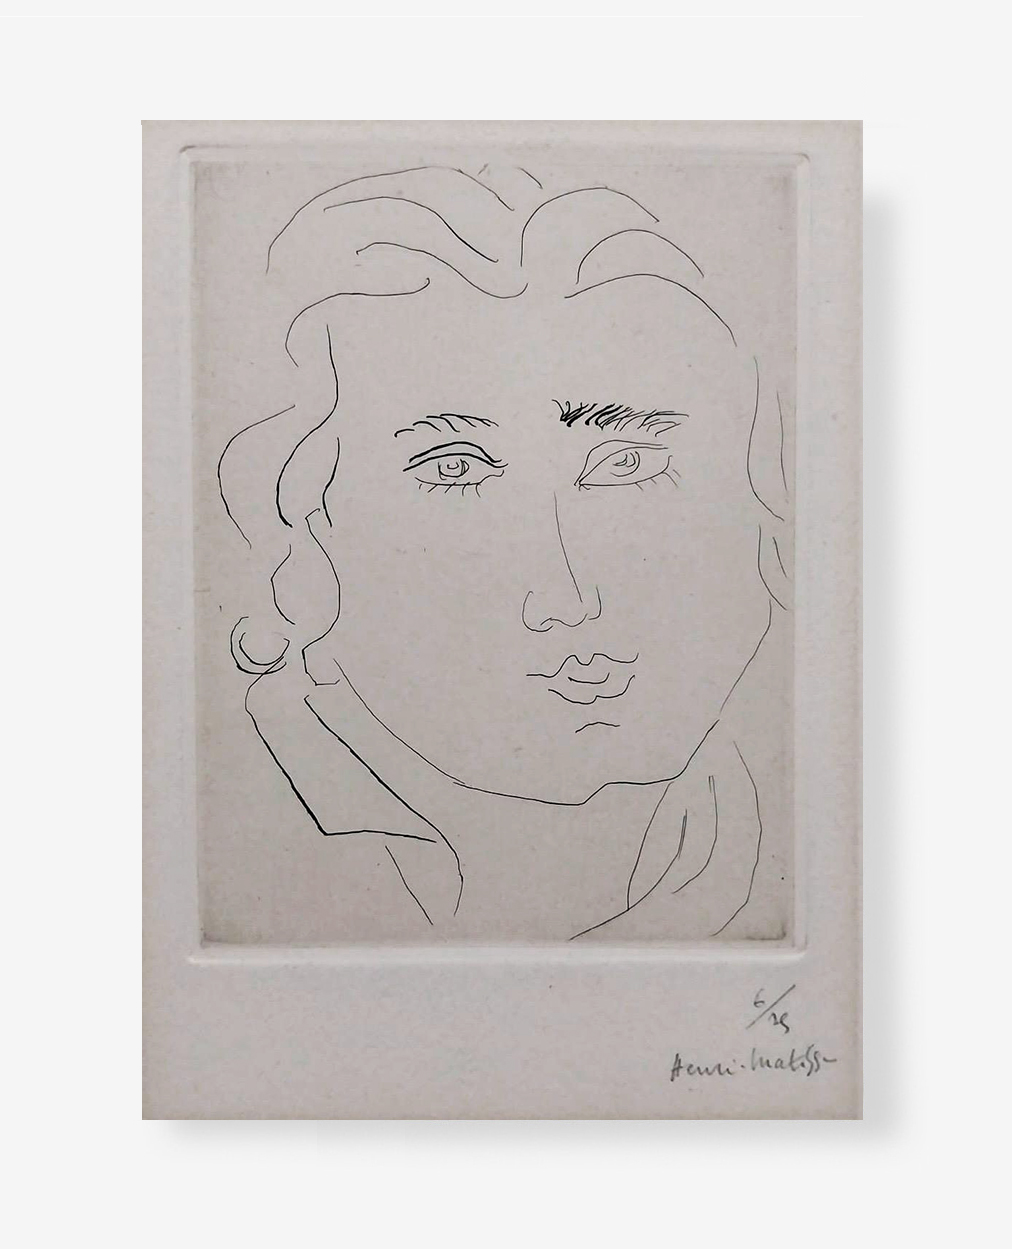 Henri-Matisse-Head-of-a-girl-with-Rectangular-Eyebrows-1930-sito-1